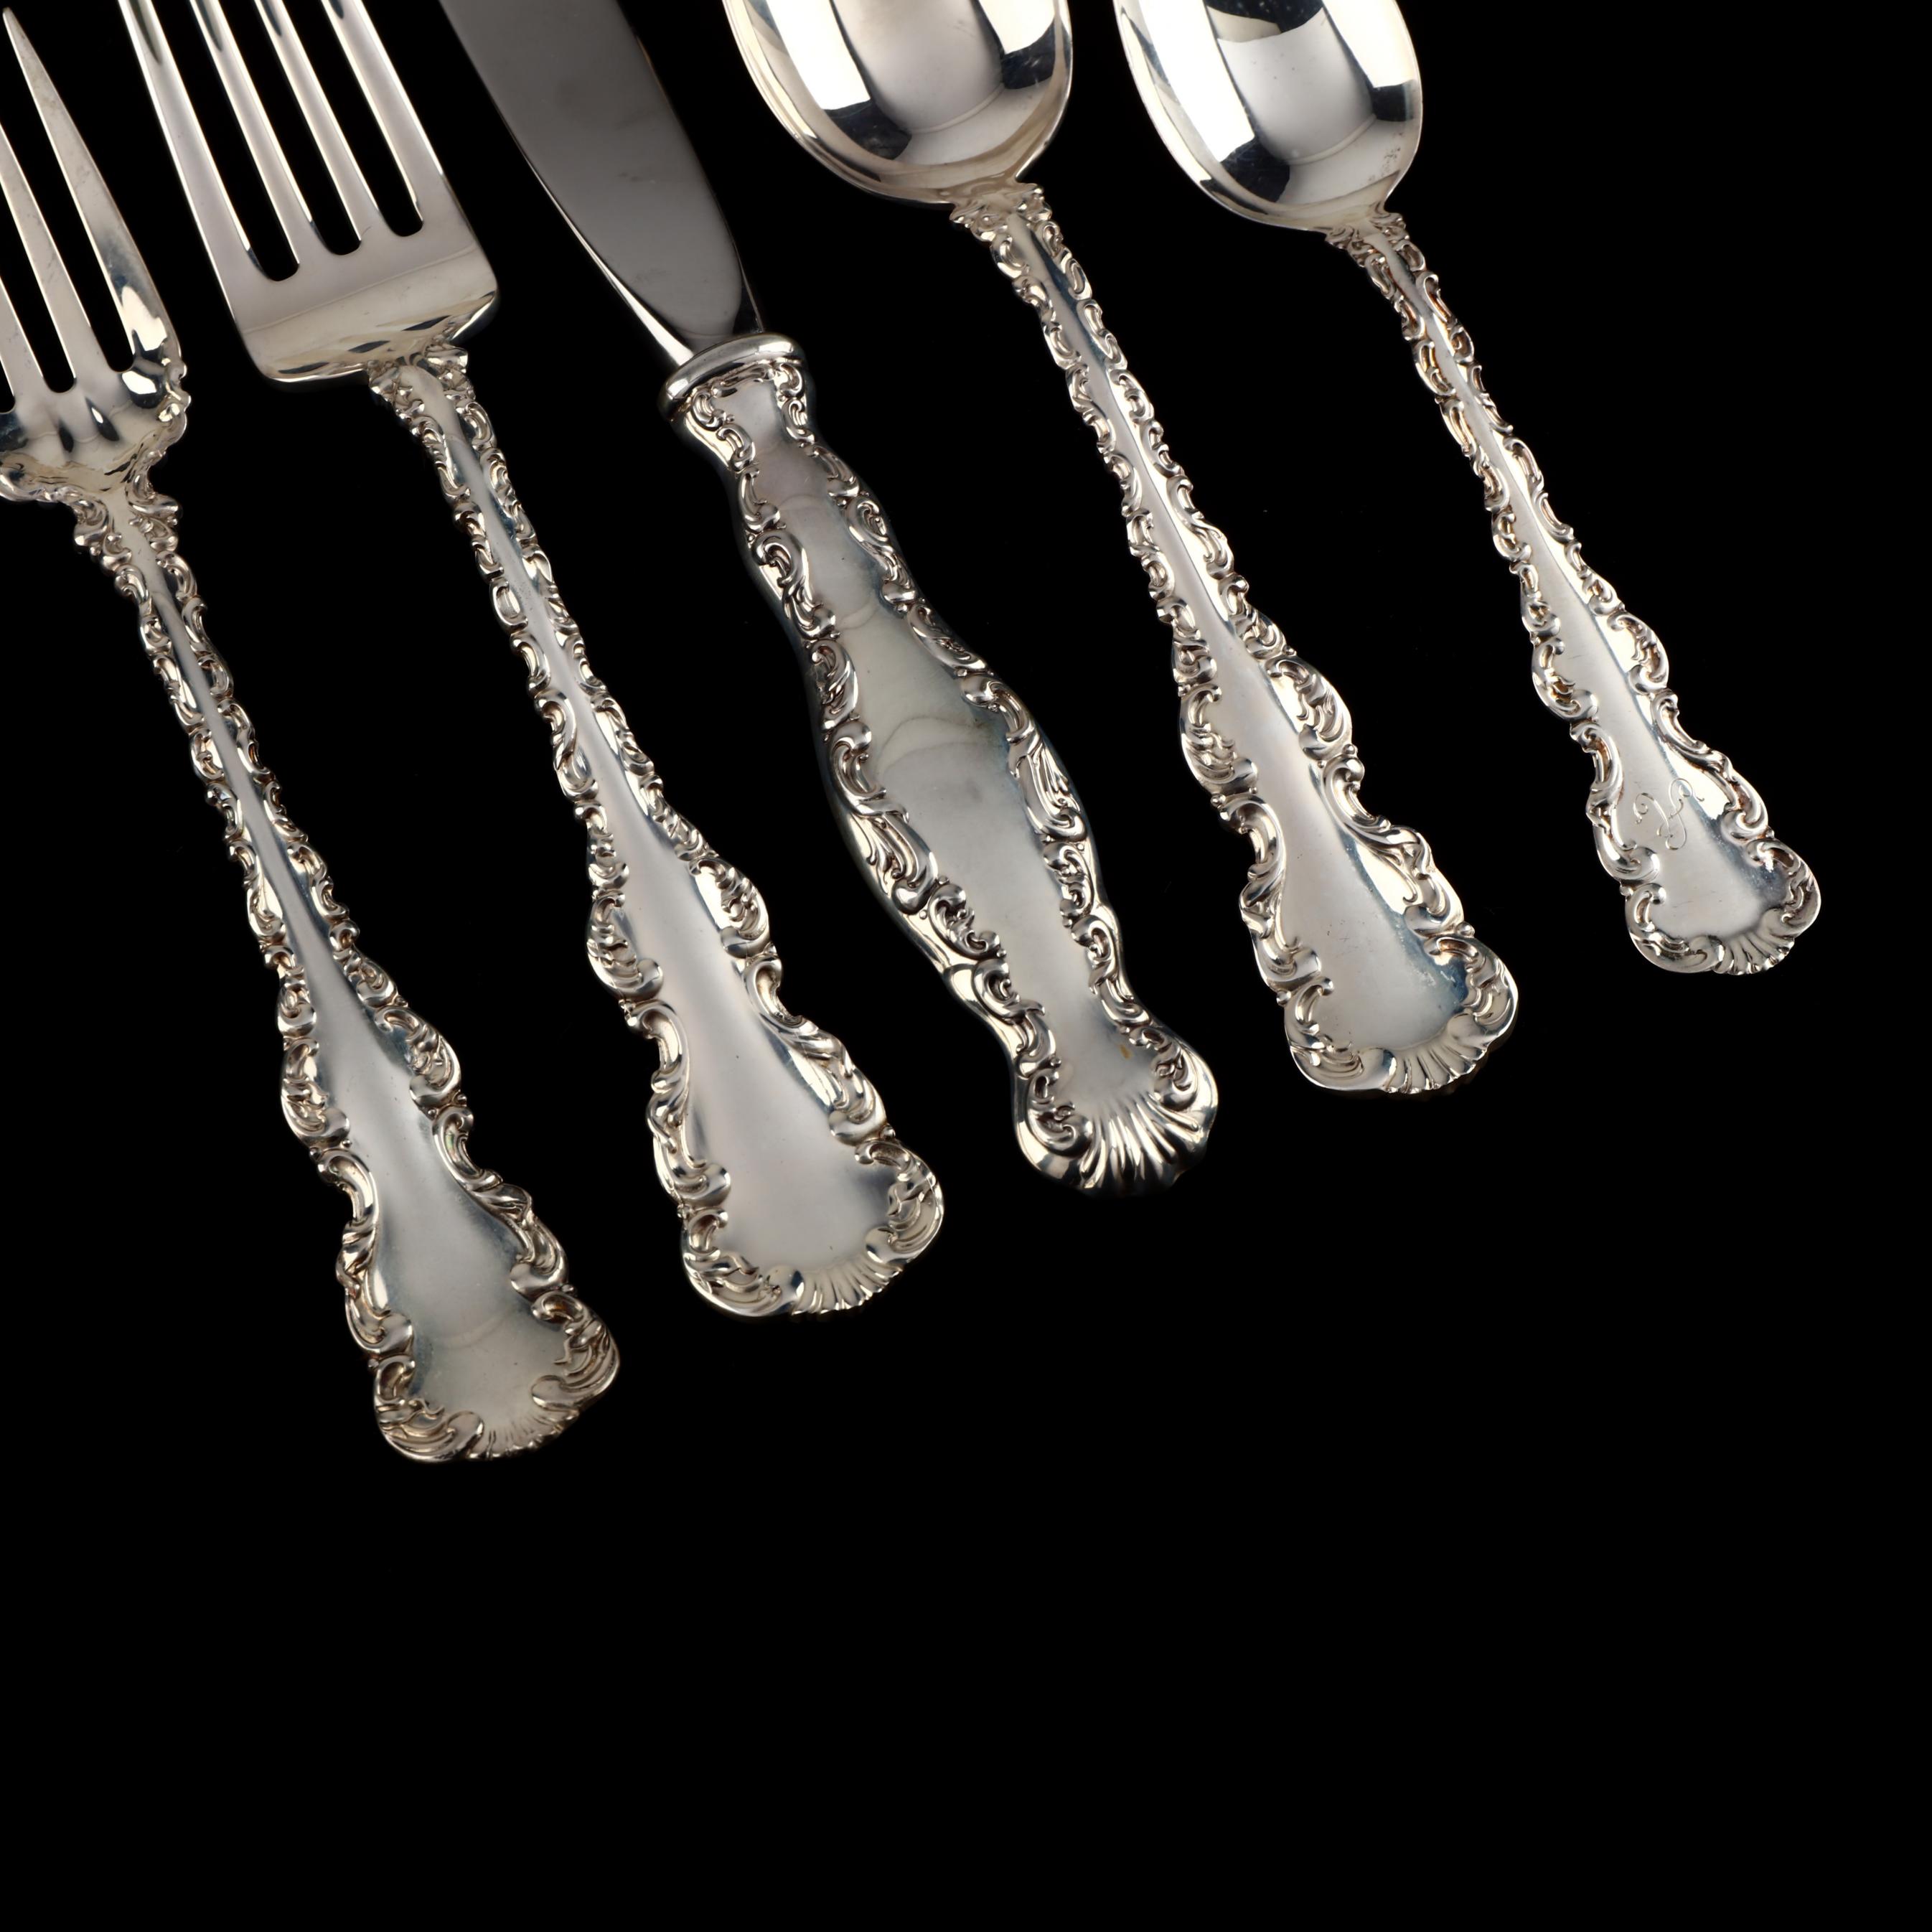 Louis Xv by Gorham Whiting Sterling Silver Flatware Set For 12